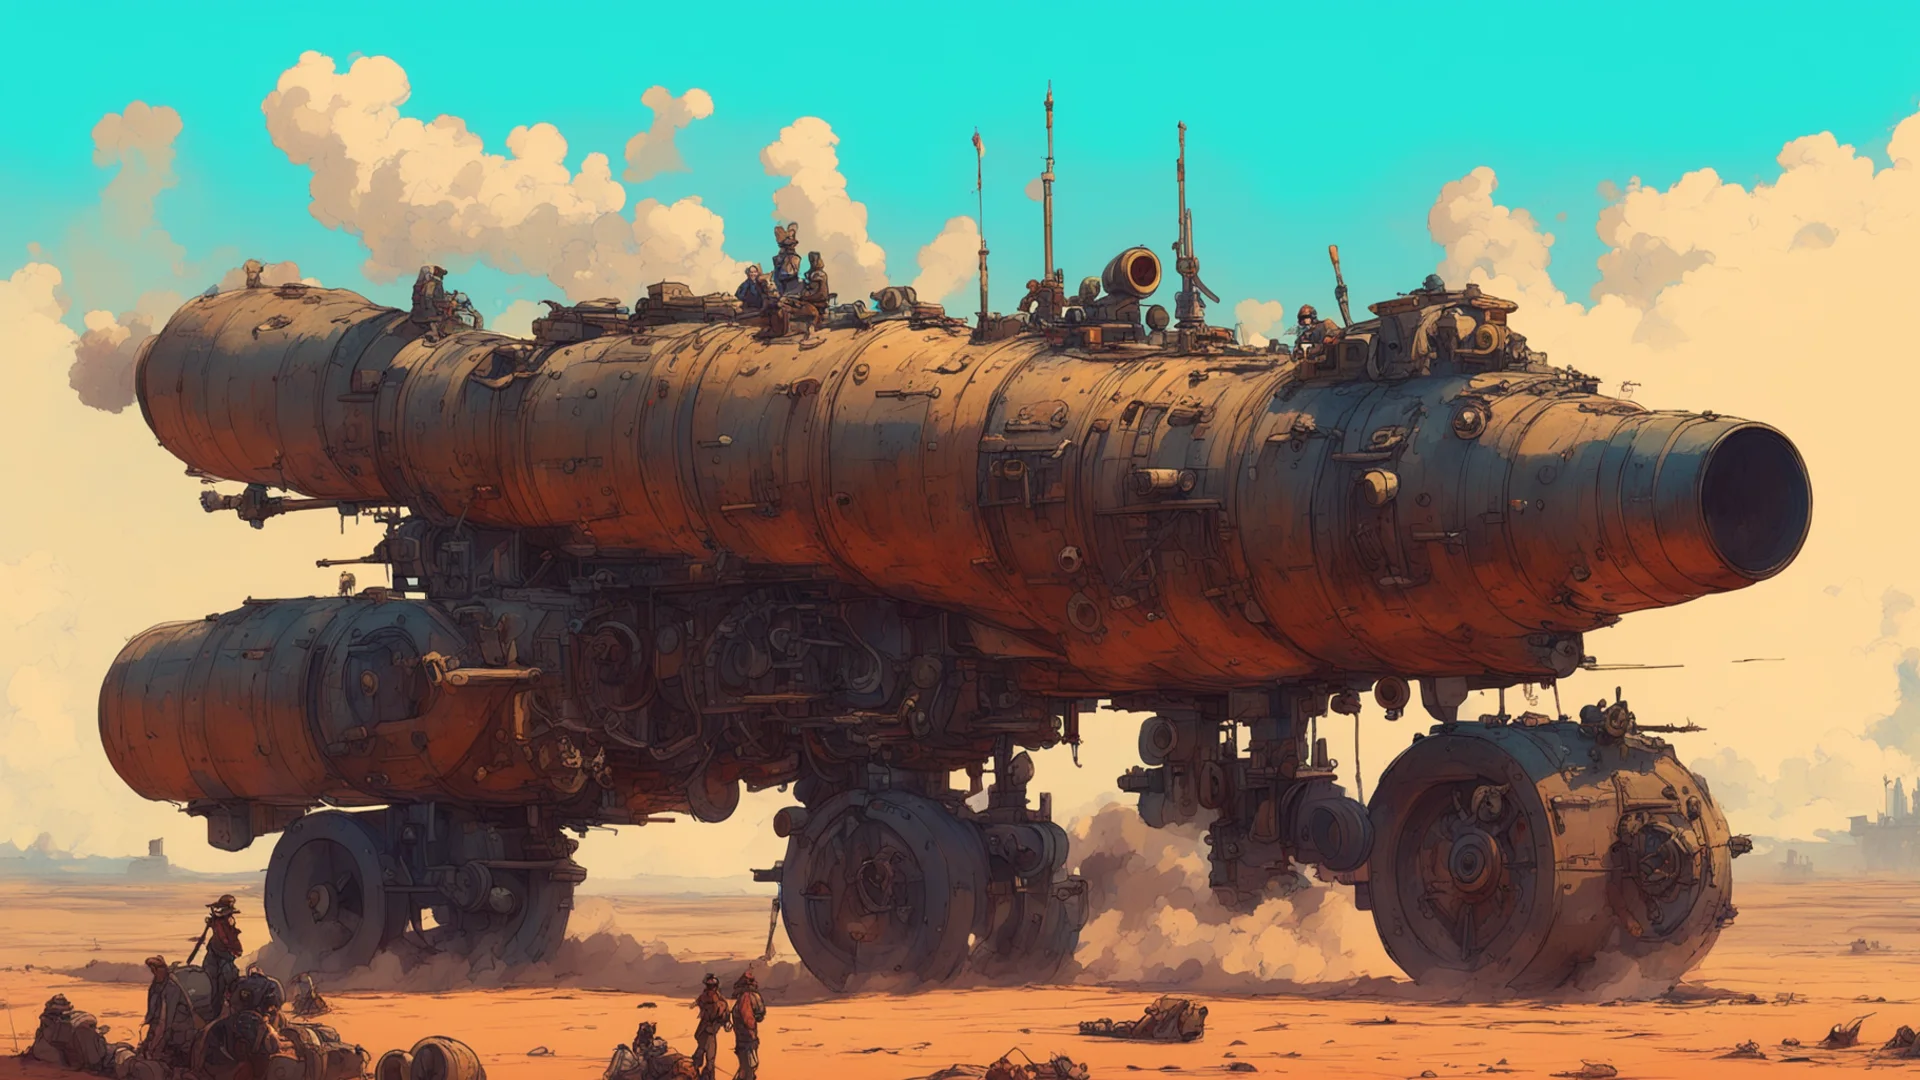 aiartstation art a smoking cannon designed by george lucas on a battlefield moebius ghibli ian mcque wallpaper confident engaging wow 3 wide